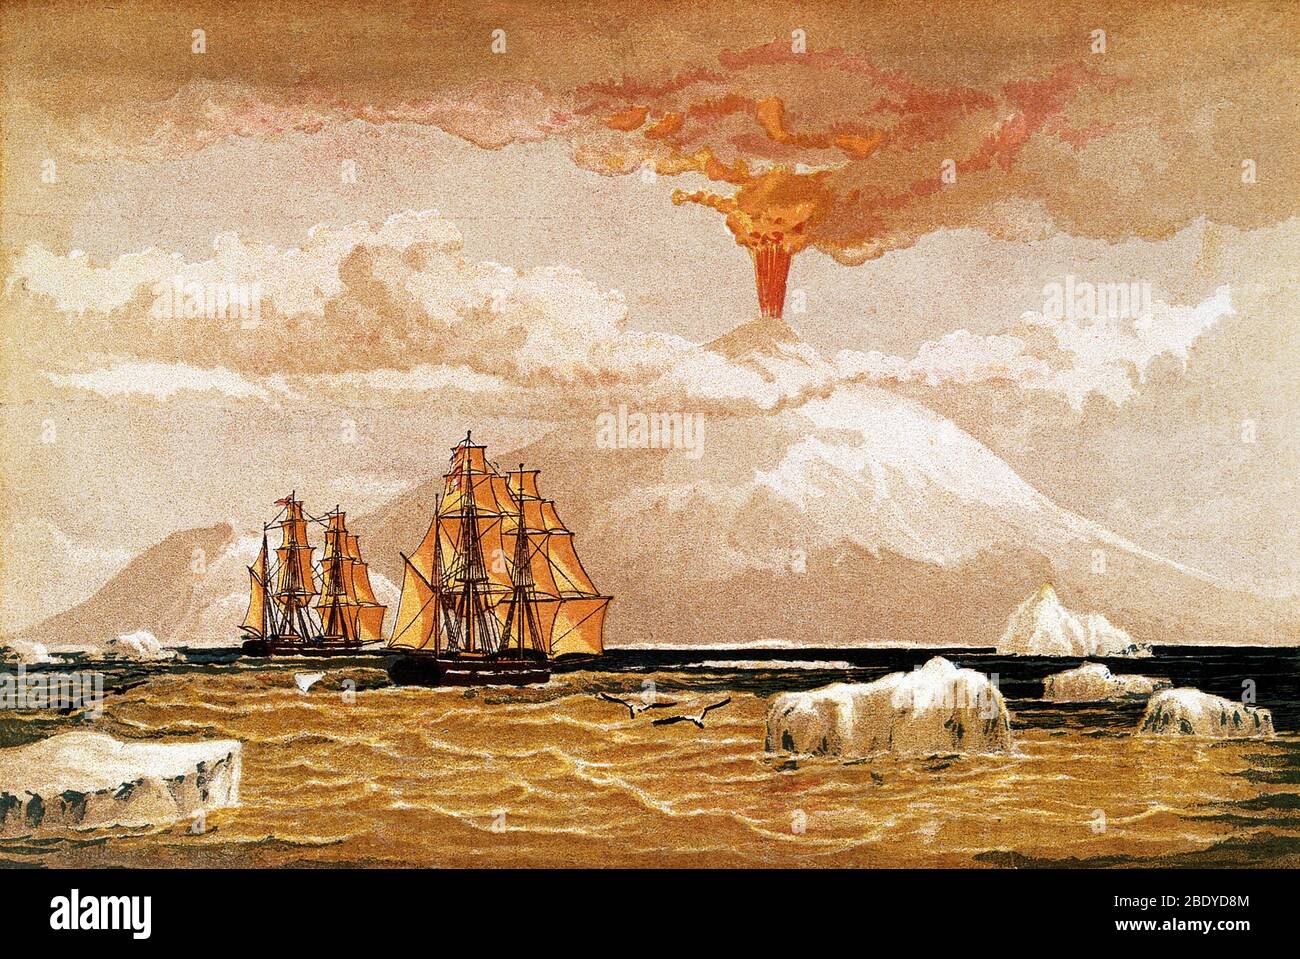 Mount Erebus, Antarctica: the volcano in eruption. Chromolithograph from 1868. Mount Erebus was discovered on January 27, 1841 (and observed to be in eruption) by polar explorer Sir James Clark Ross who named it and its companion, Mount Terror, after his ships, Erebus and Terror. Present with Ross on the Erebus was the young Joseph Hooker, future president of the Royal Society. Mount Erebus is the southernmost active volcano on earth and the most active volcano in Antarctica, with a summit elevation of 3,794 metres (12,448 ft). It is located on Ross Island. Stock Photo